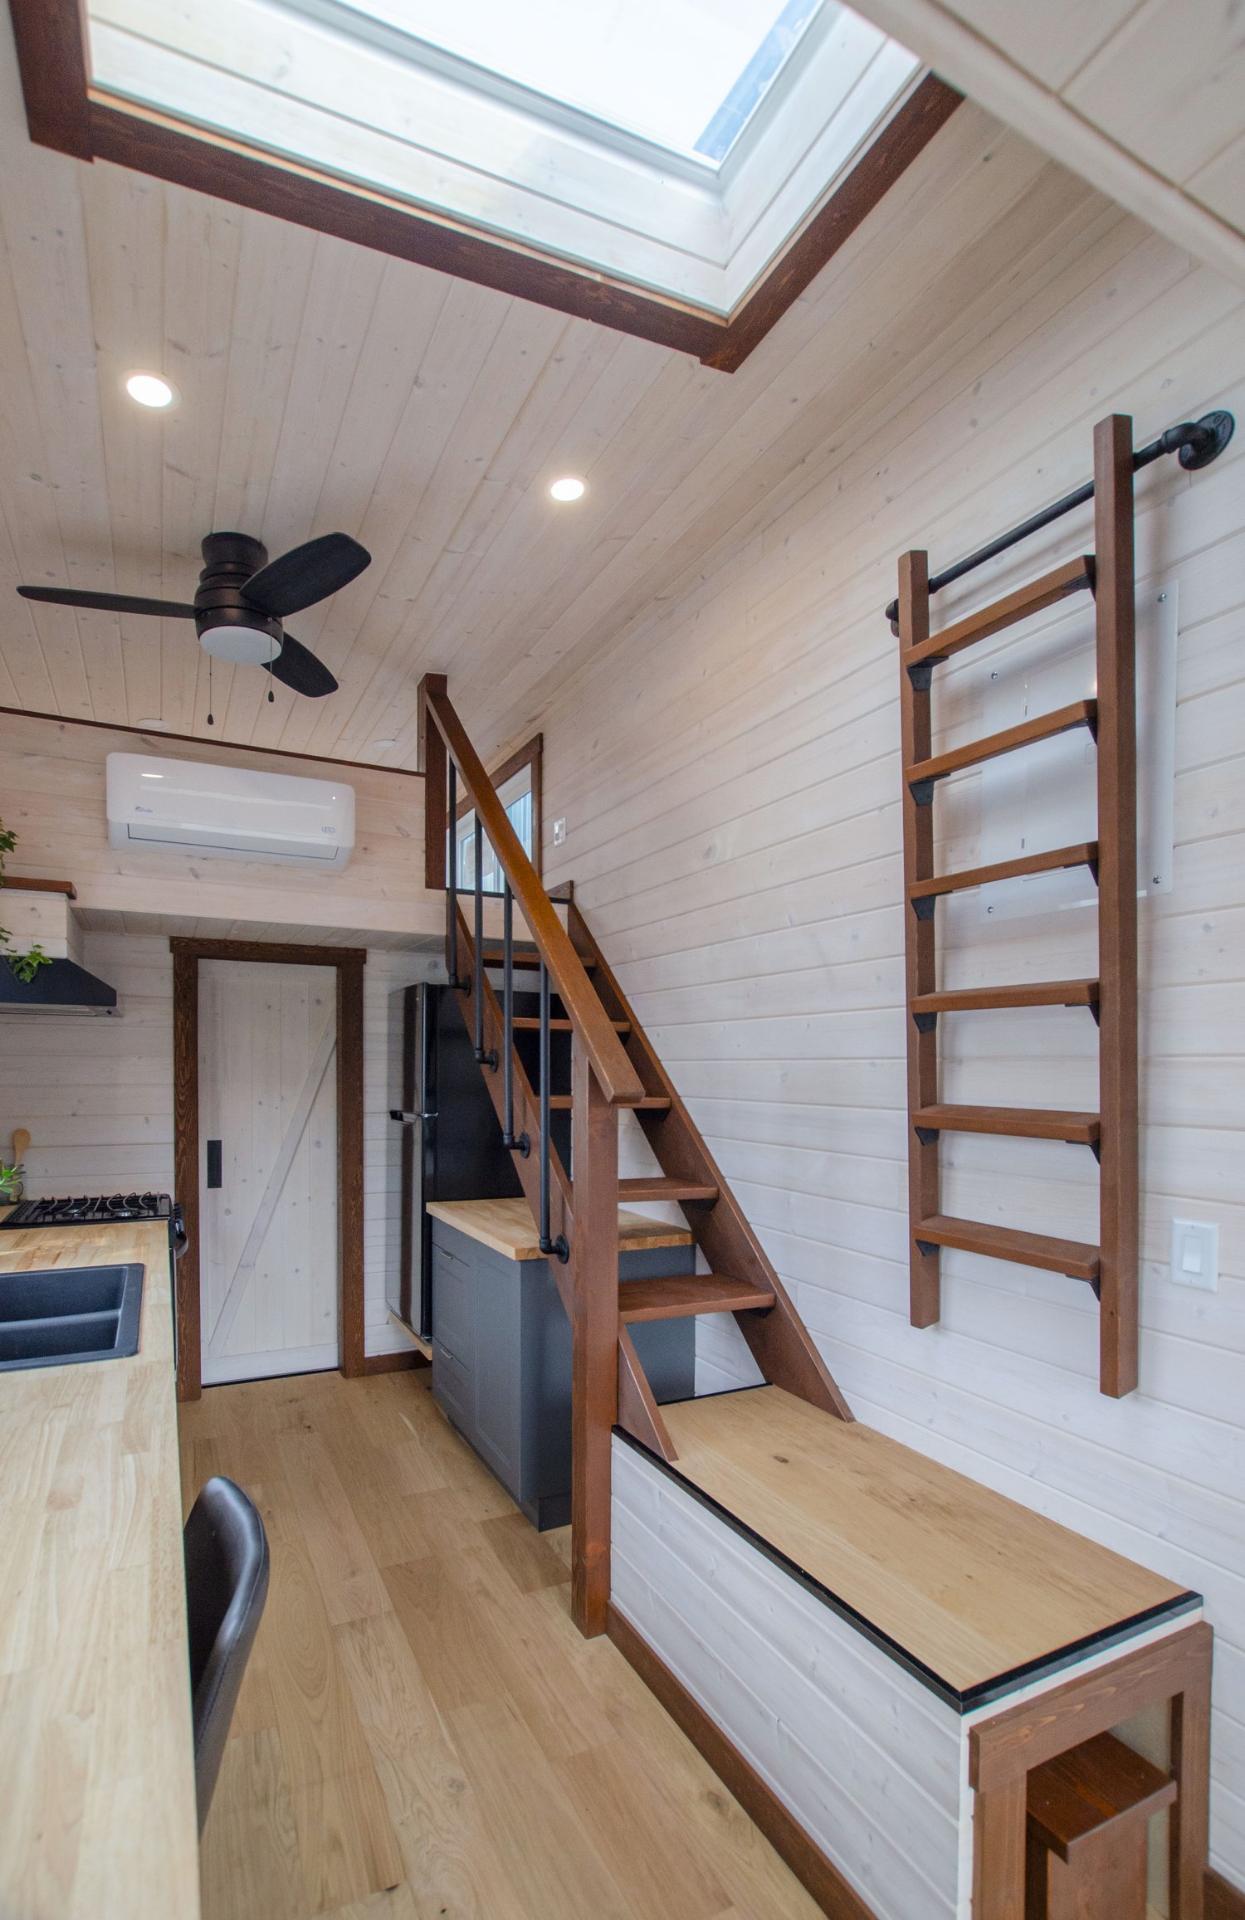 Ladder Hanging on Rack - Pacific Wren by Rewild Homes